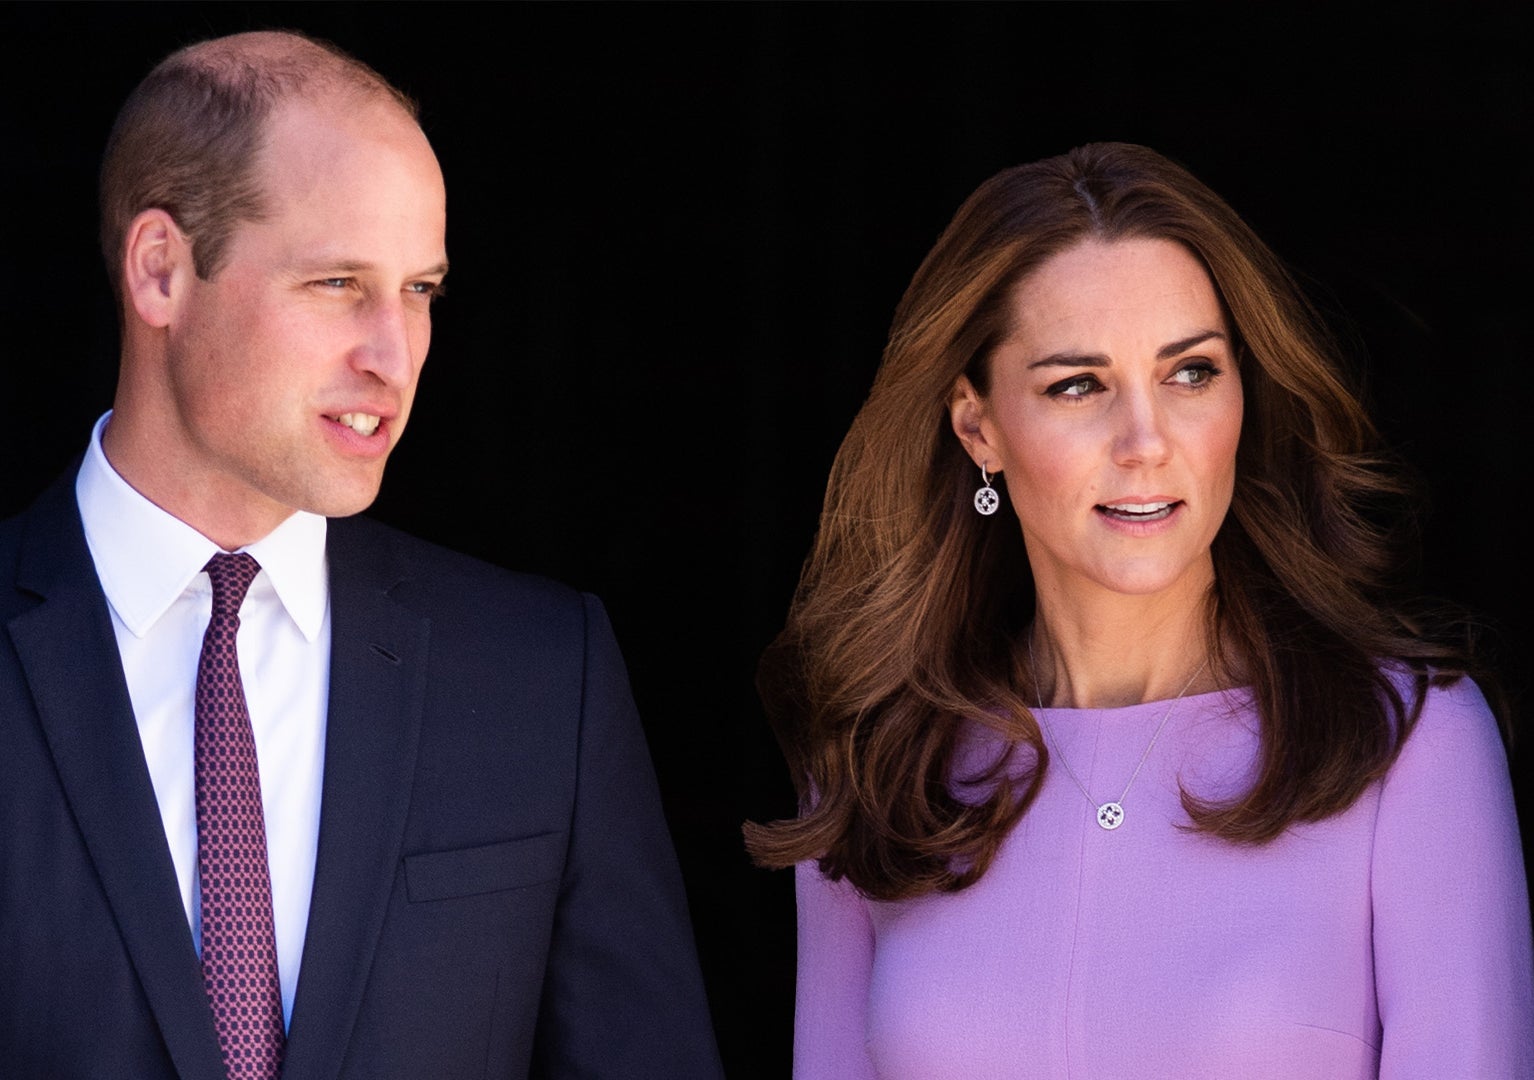 What Kate Middleton & Prince William Think About Conspiracy Theories Surrounding Them: Royal Expert